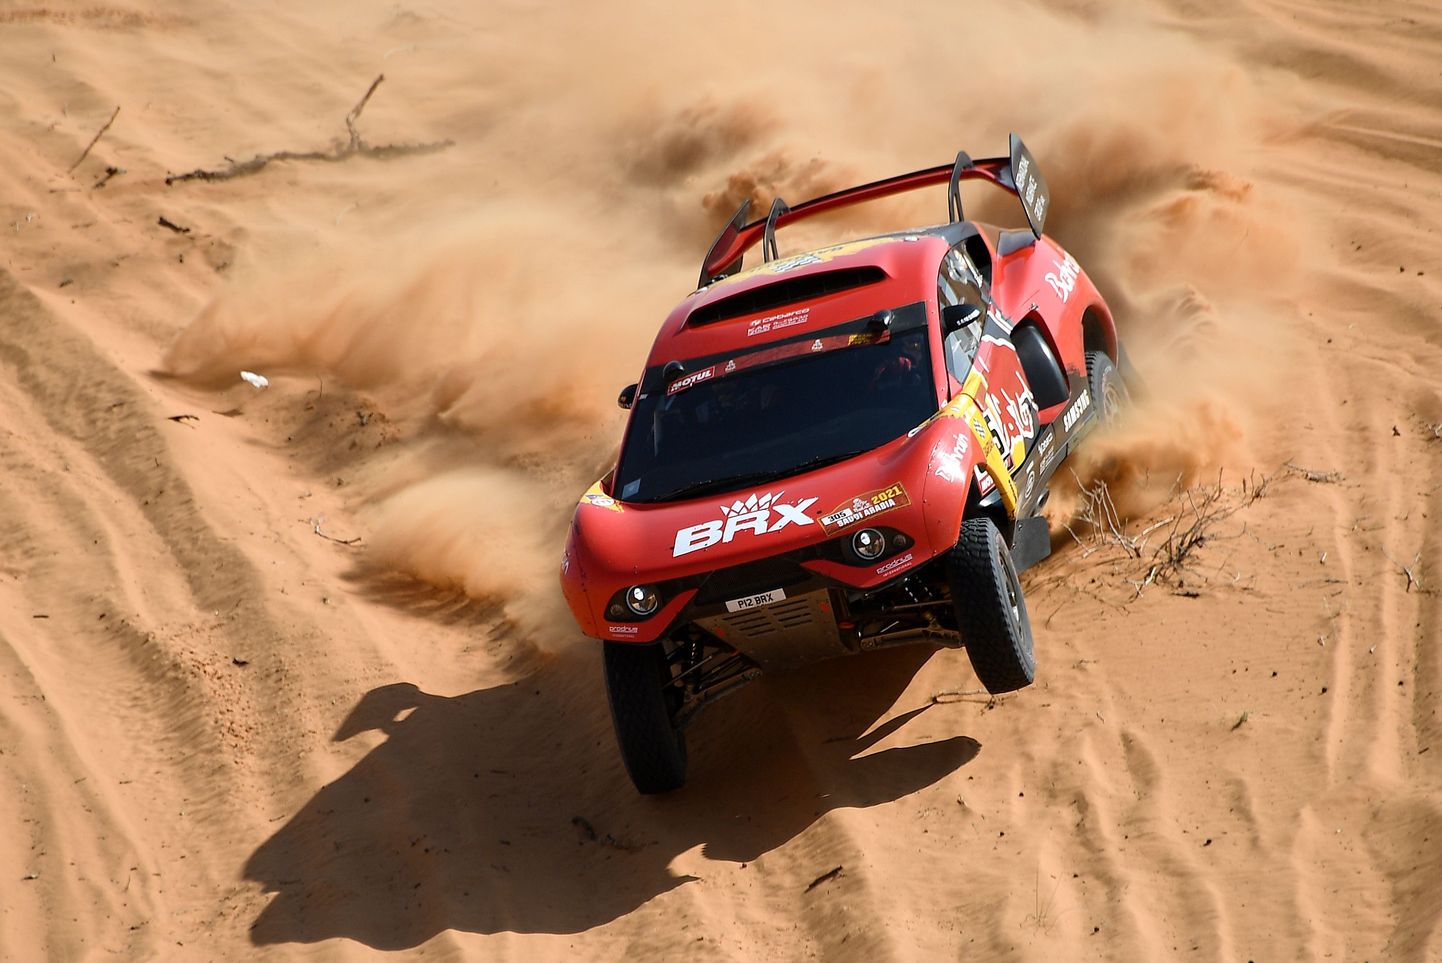 French driver Sebastien Loeb and co-driver Daniel Elena of Monaco compete during the 6th Stage of the Dakar Rally 2021 between Buraydah and Hail, in Saudi Arabia, on January 8, 2021. (Photo by FRANCK FIFE / AFP)